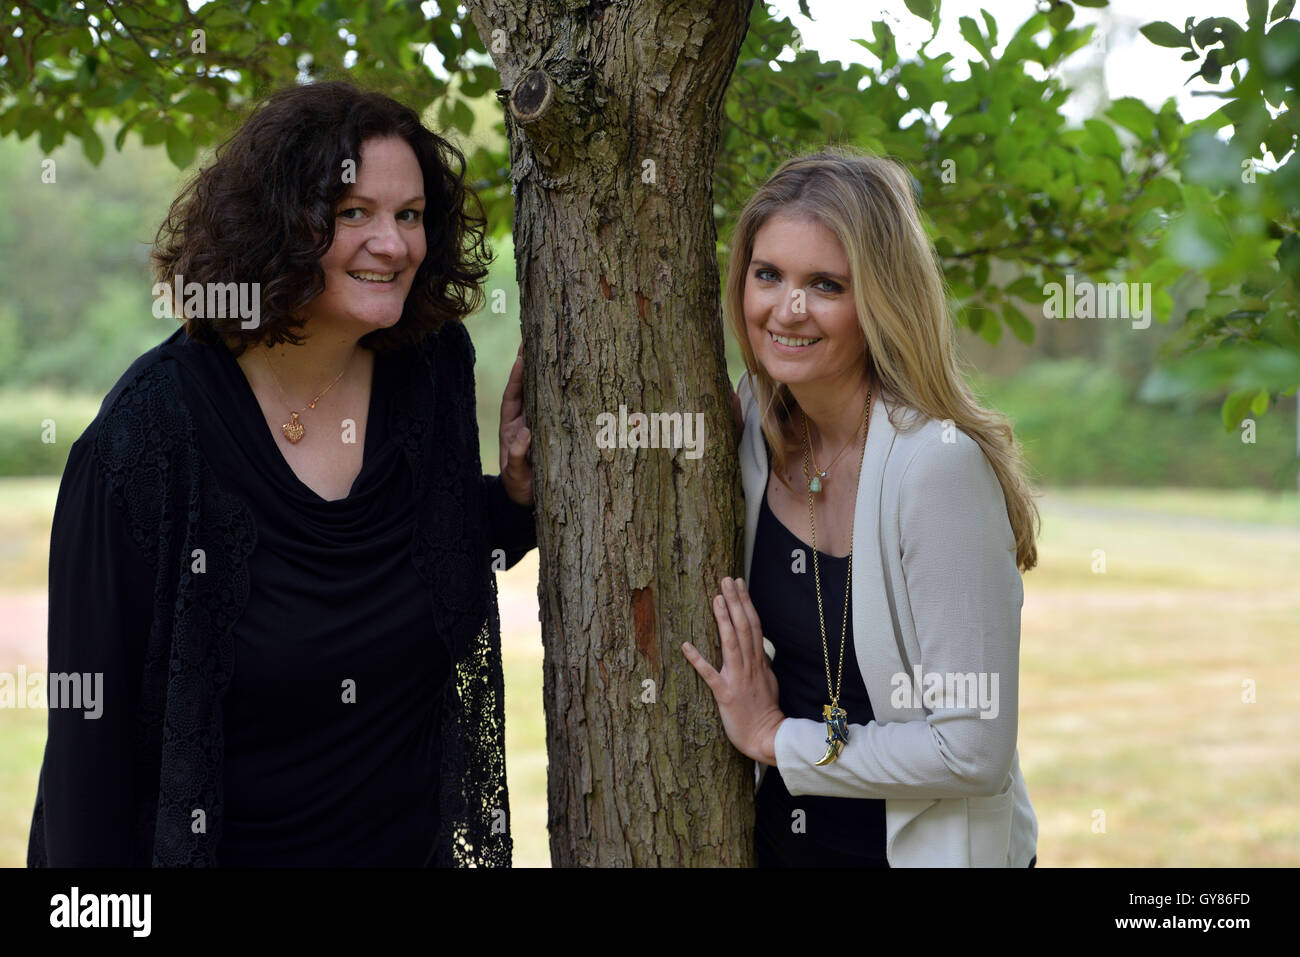 Birkenfeld, Germany. 17th Sep, 2016. Former model Felicity Gain (R) from London and Siobhan Kirsten Mansfield pose in a park in Birkenfeld, Germany, 17 September 2016. In 2002, 44-year-old Mansfield from Trassem, Germany donated bone marrow for Felicity Gain, now 38, which saved her life. Phoot: HARALD TITTEL/dpa/Alamy Live News Stock Photo